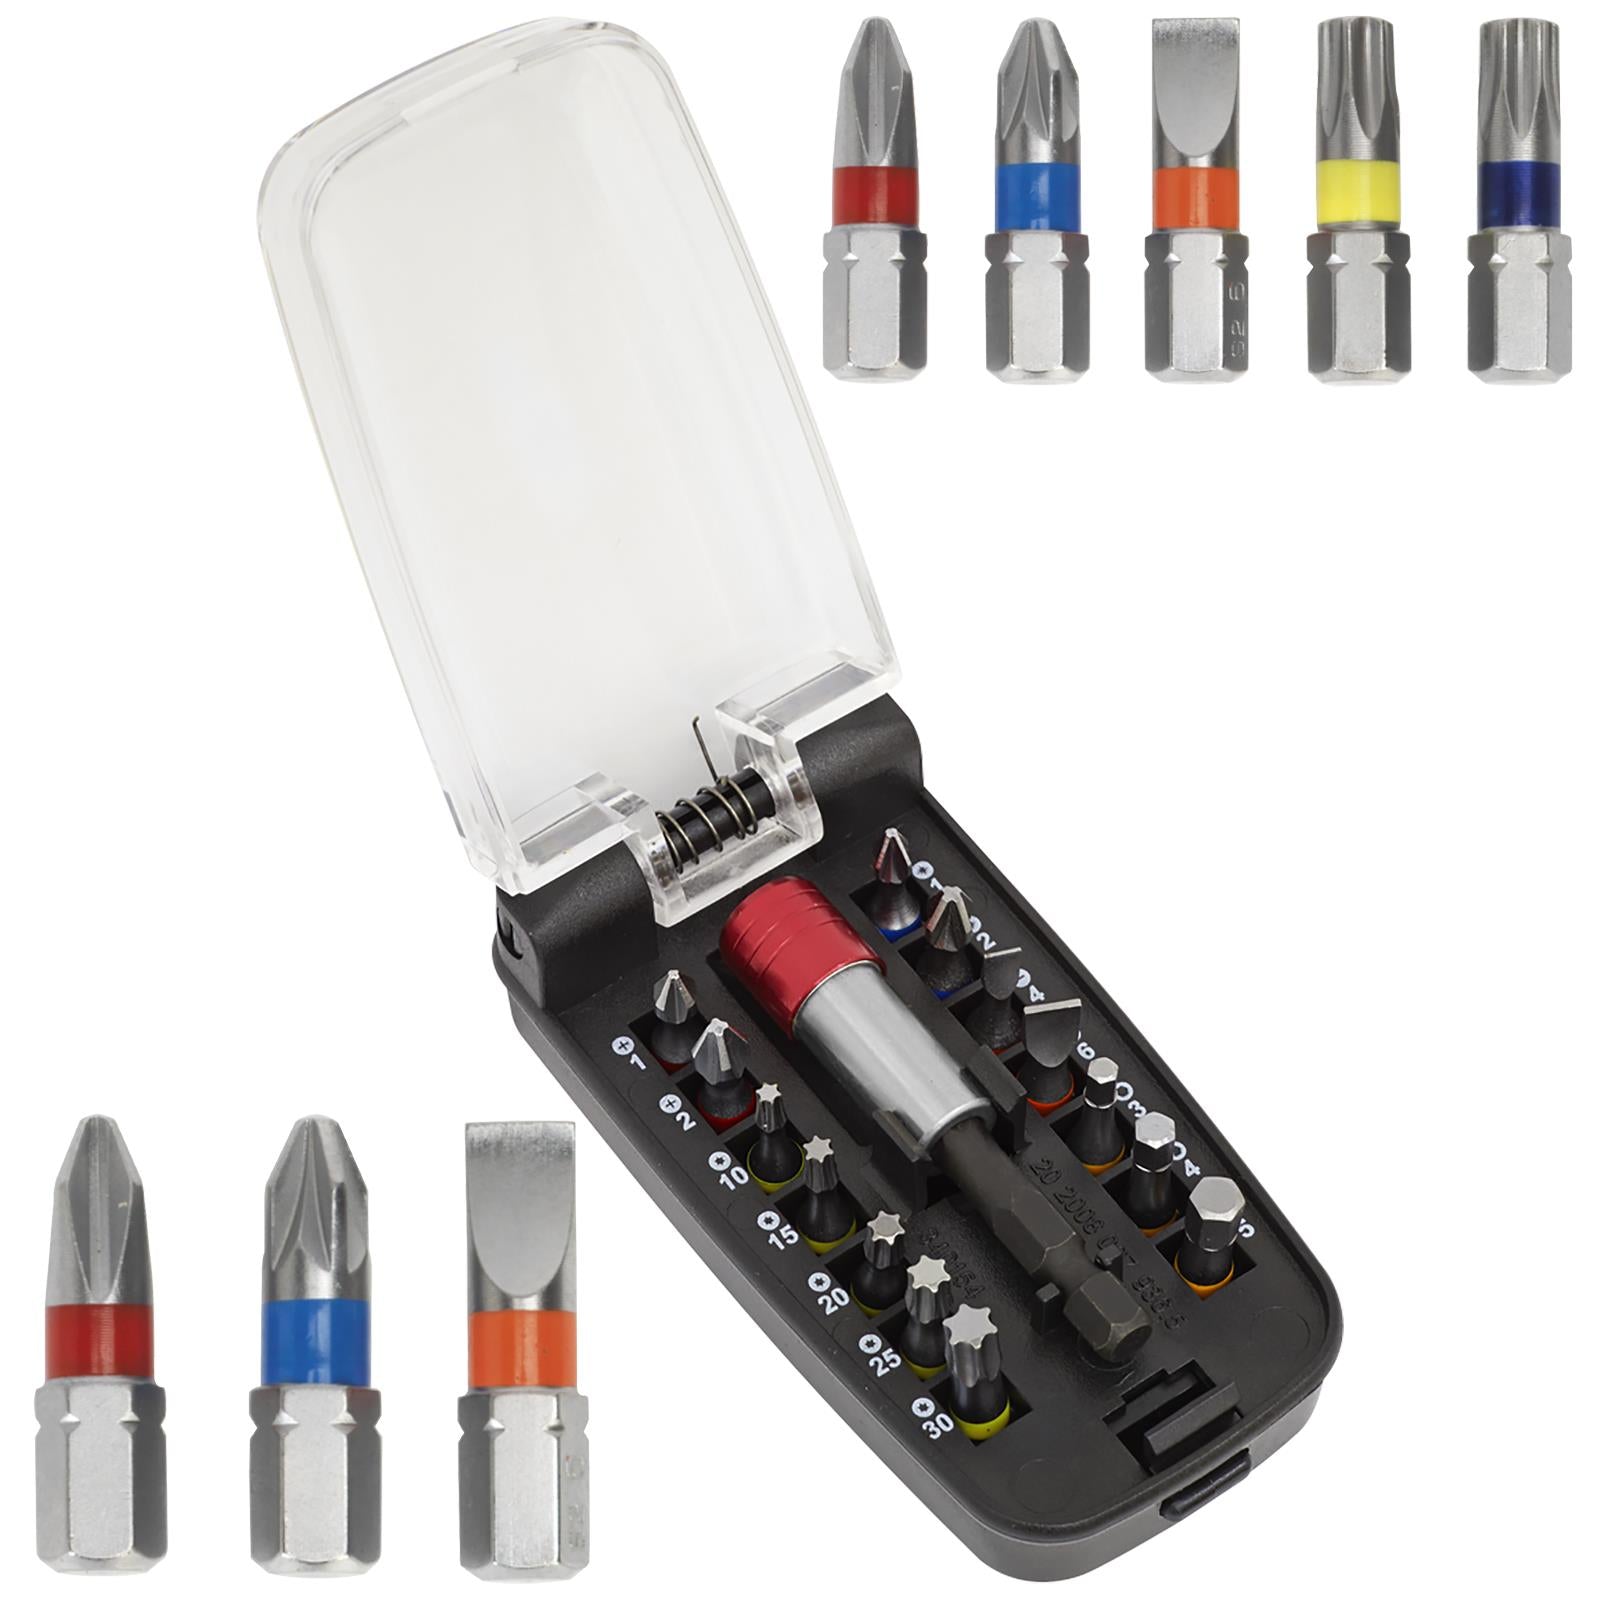 Sealey Power Tool Screwdriver Bit Set 15 Piece Colour Coded S2 Steel